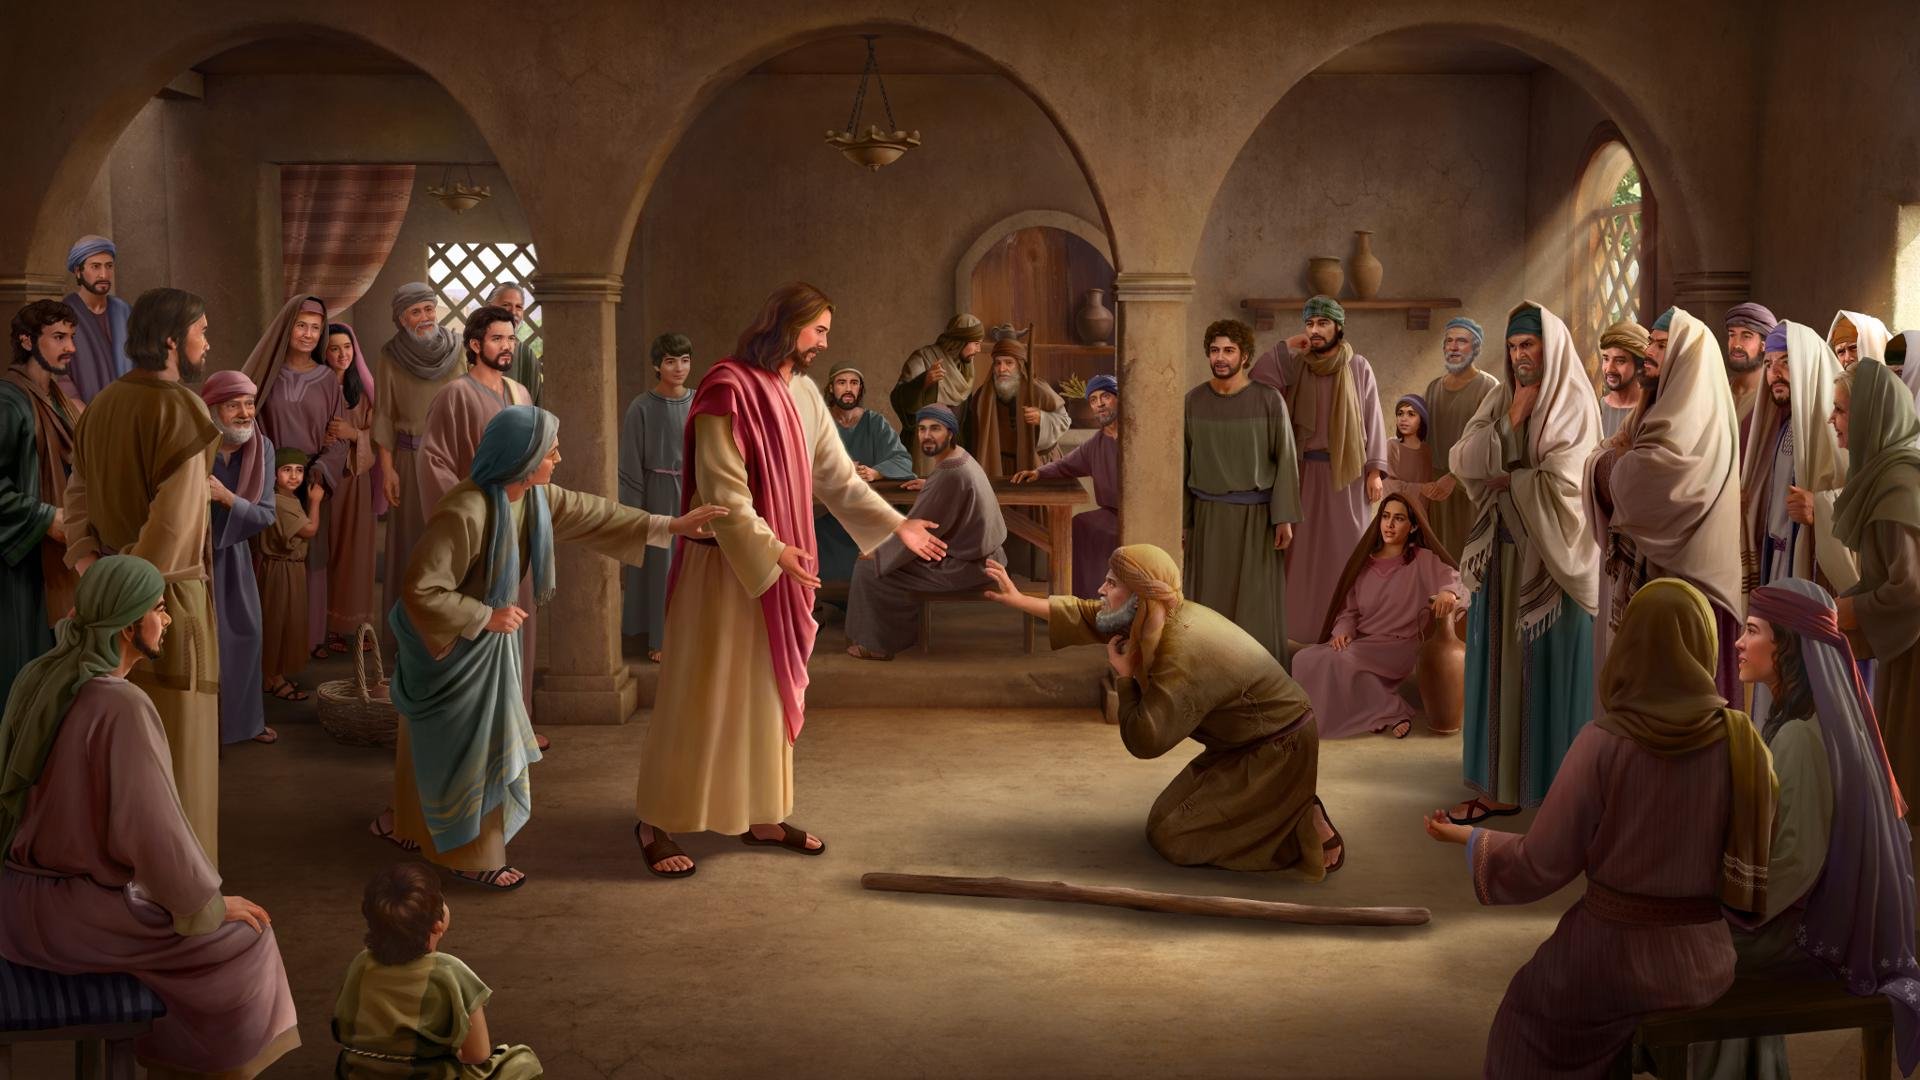 The Pharisees Judge The Lord Jesus-His Friends Try To Lay Hold On Him